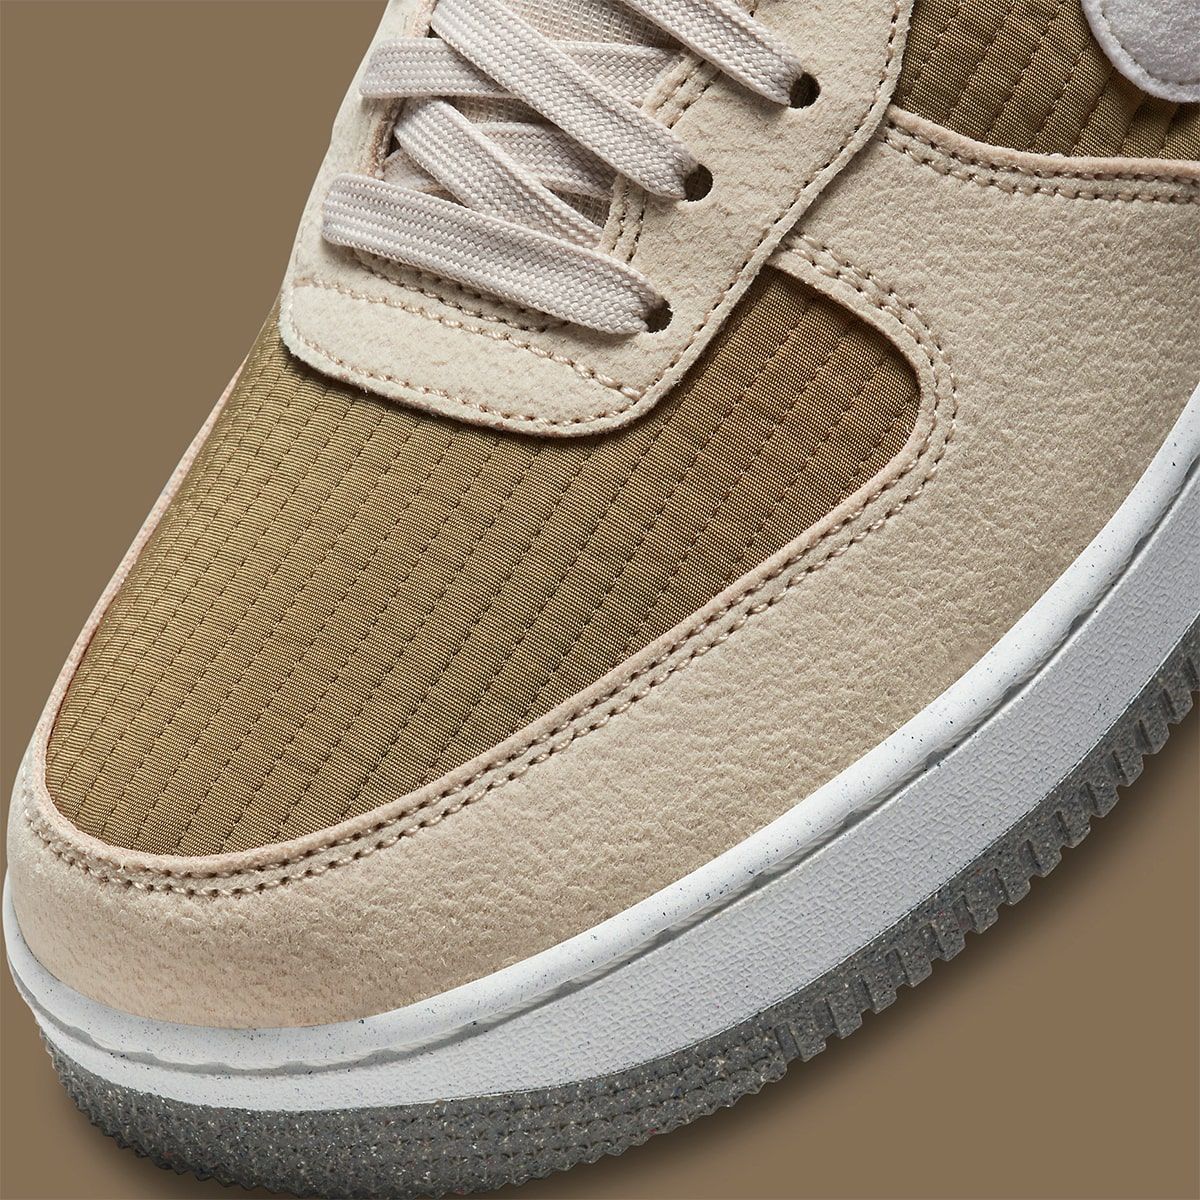 A Second Air Force 1 Toasty Appears in “Brown Kelp” | House of Heat°